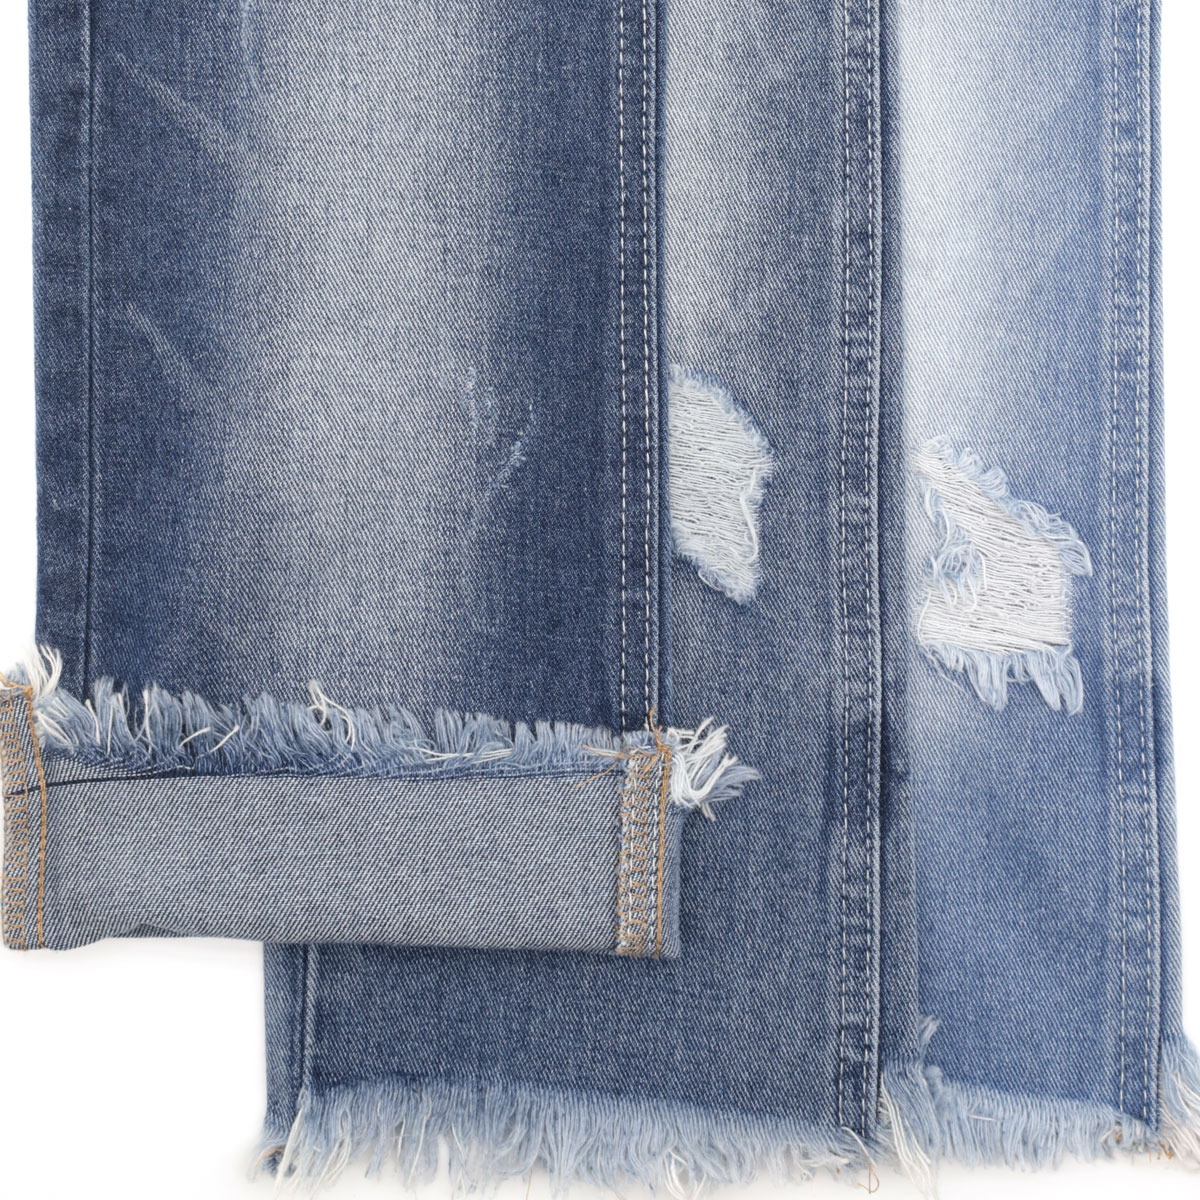 5 Ways to Find a Stretch Denim Material (Without Breaking the Bank) 2